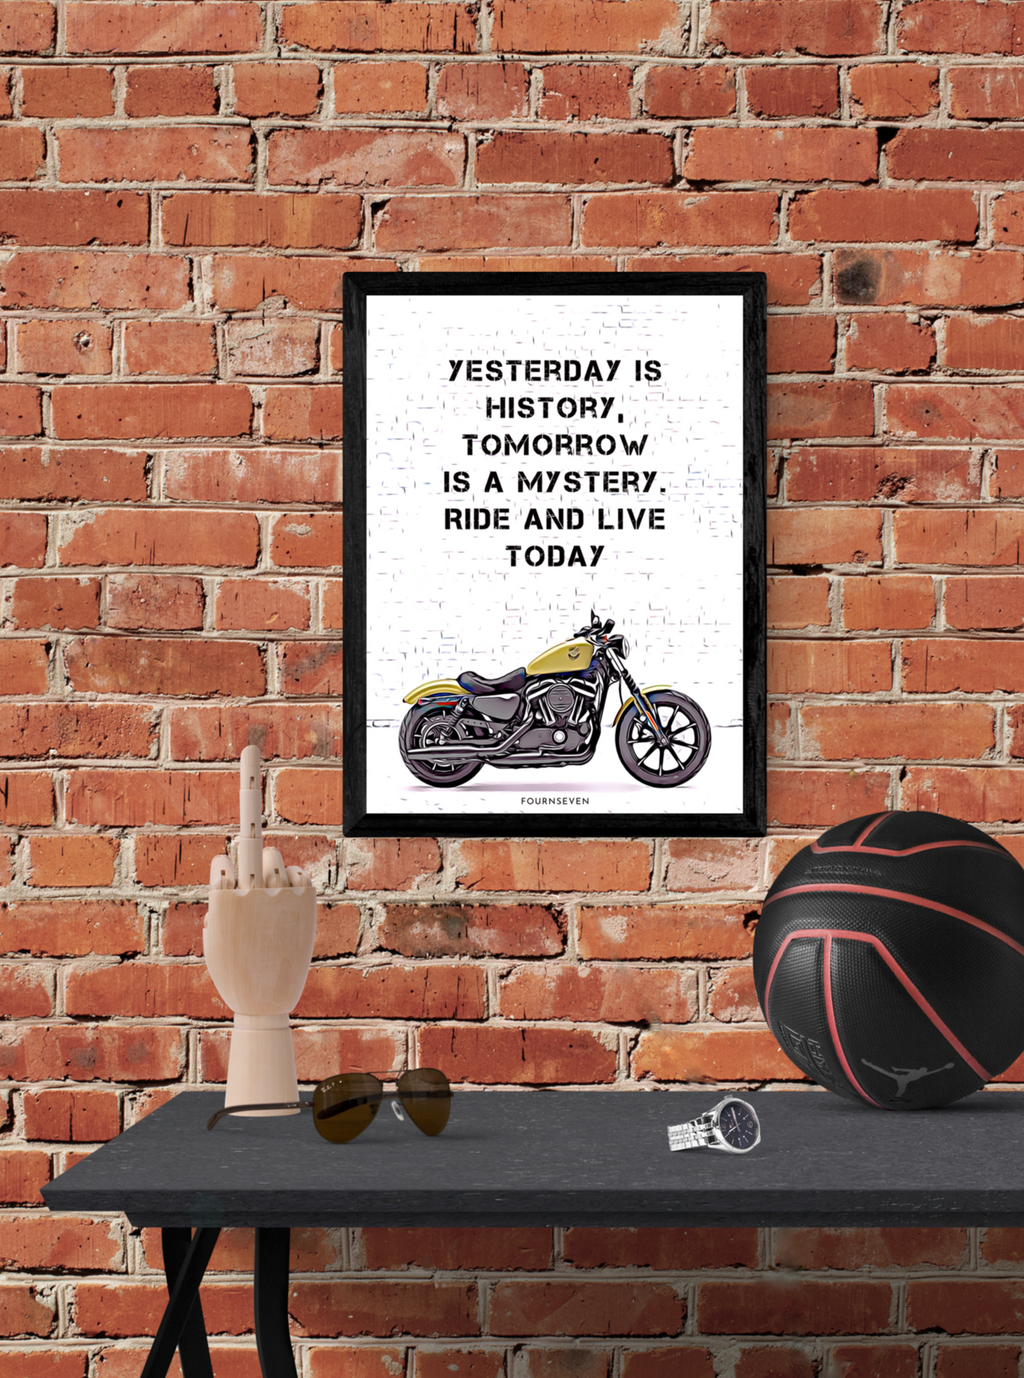 RIDE AND LIVE TODAY. Biker poster.